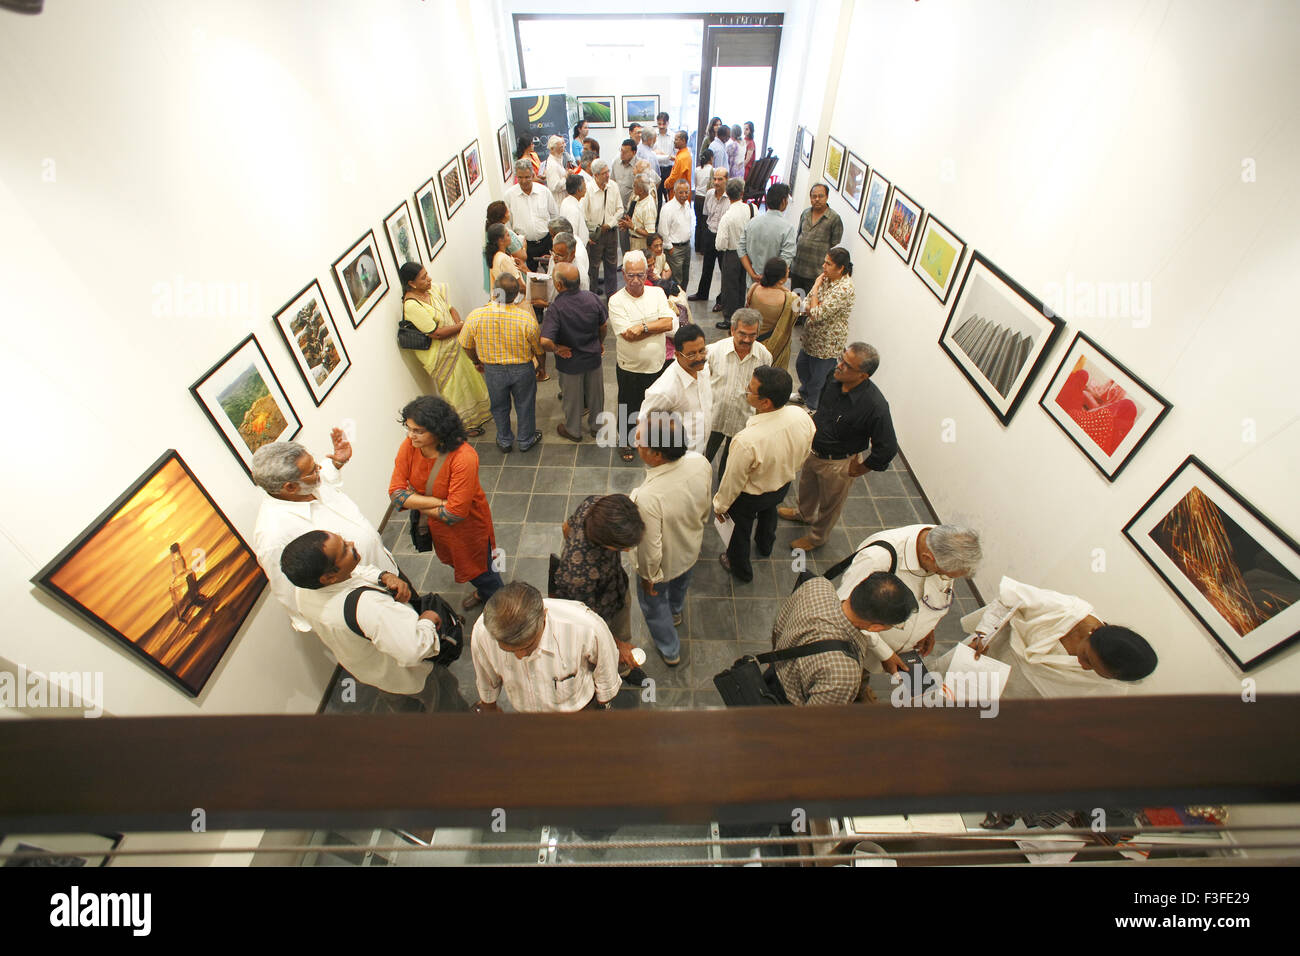 Exposition de photographie, Bees Saal Baad, Dinodia photo Library, point de vue, Art Gallery, Colaba, Bombay, Mumbai, Maharashtra, Inde, Asie Banque D'Images